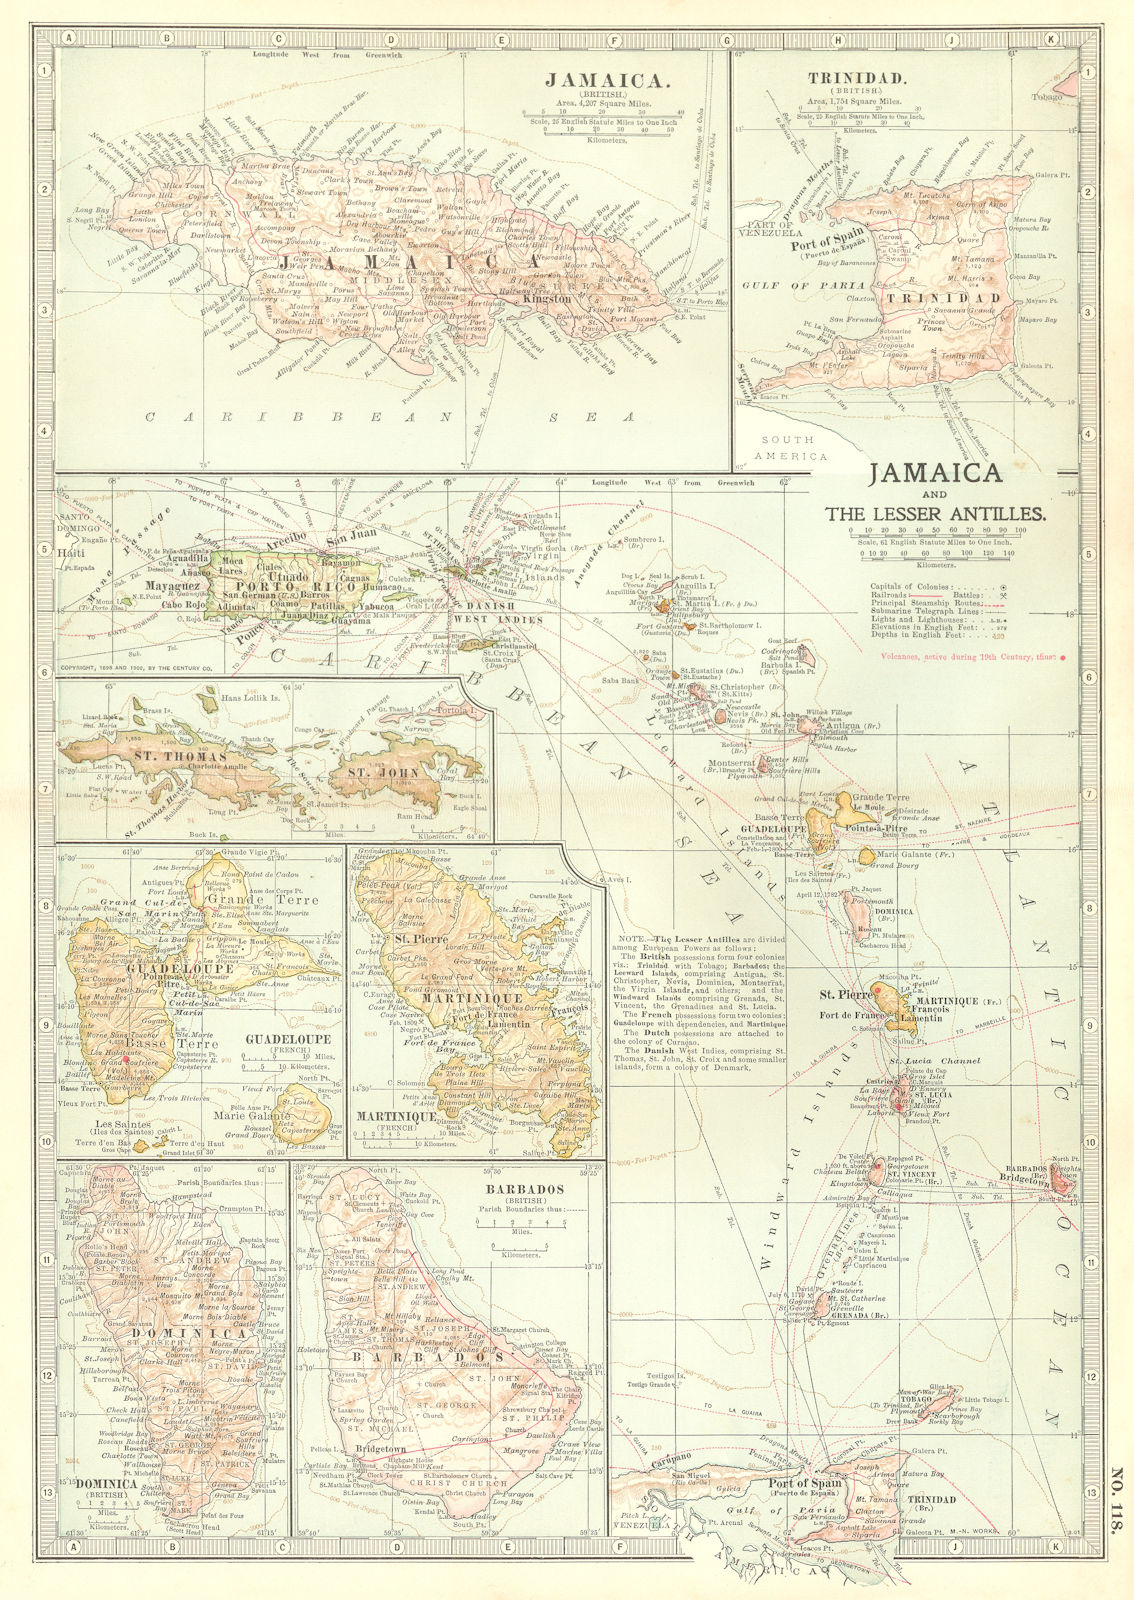 Associate Product WEST INDIES. Jamaica Barbados BVIs Martinique Trinidad Guadeloupe 1903 old map